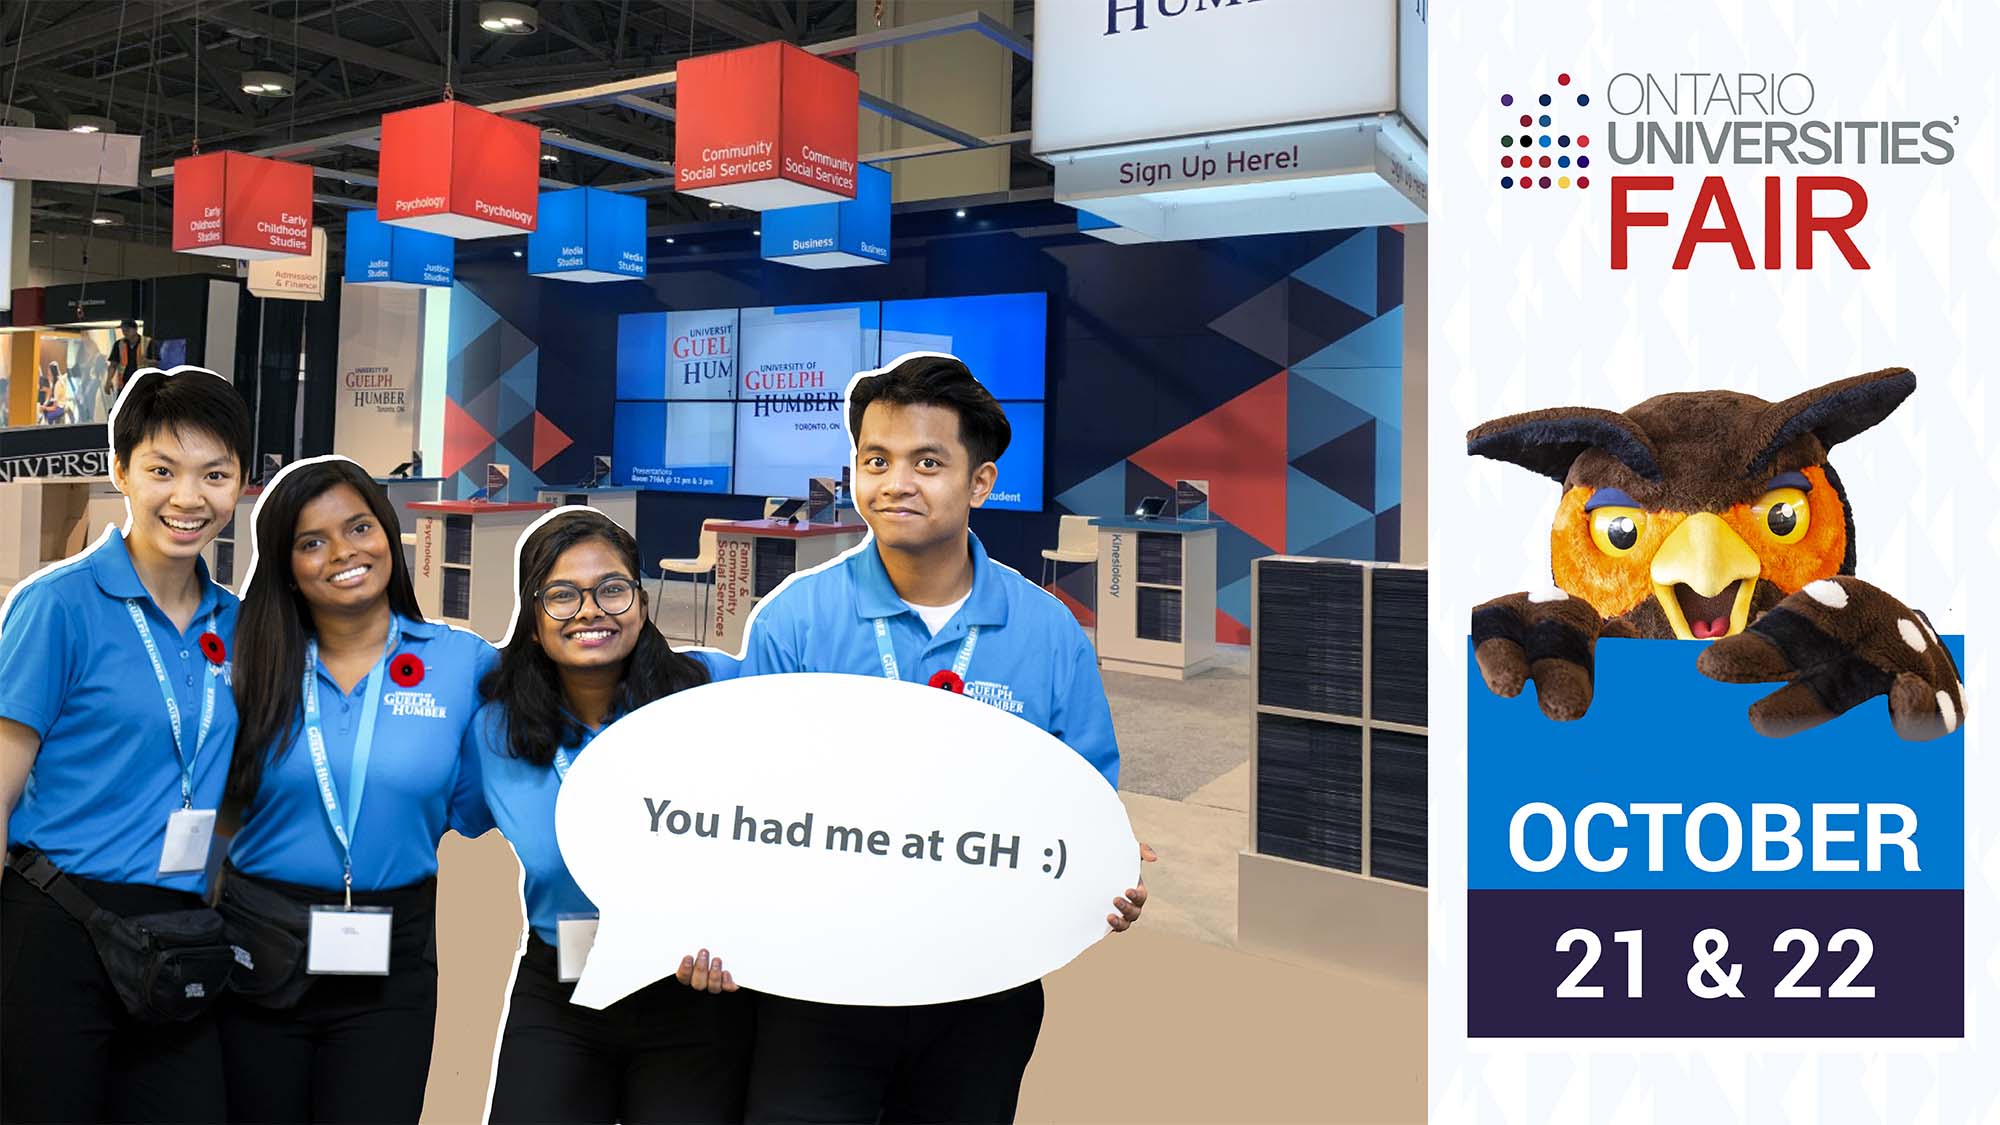 Student with 'You had me at GH' sign